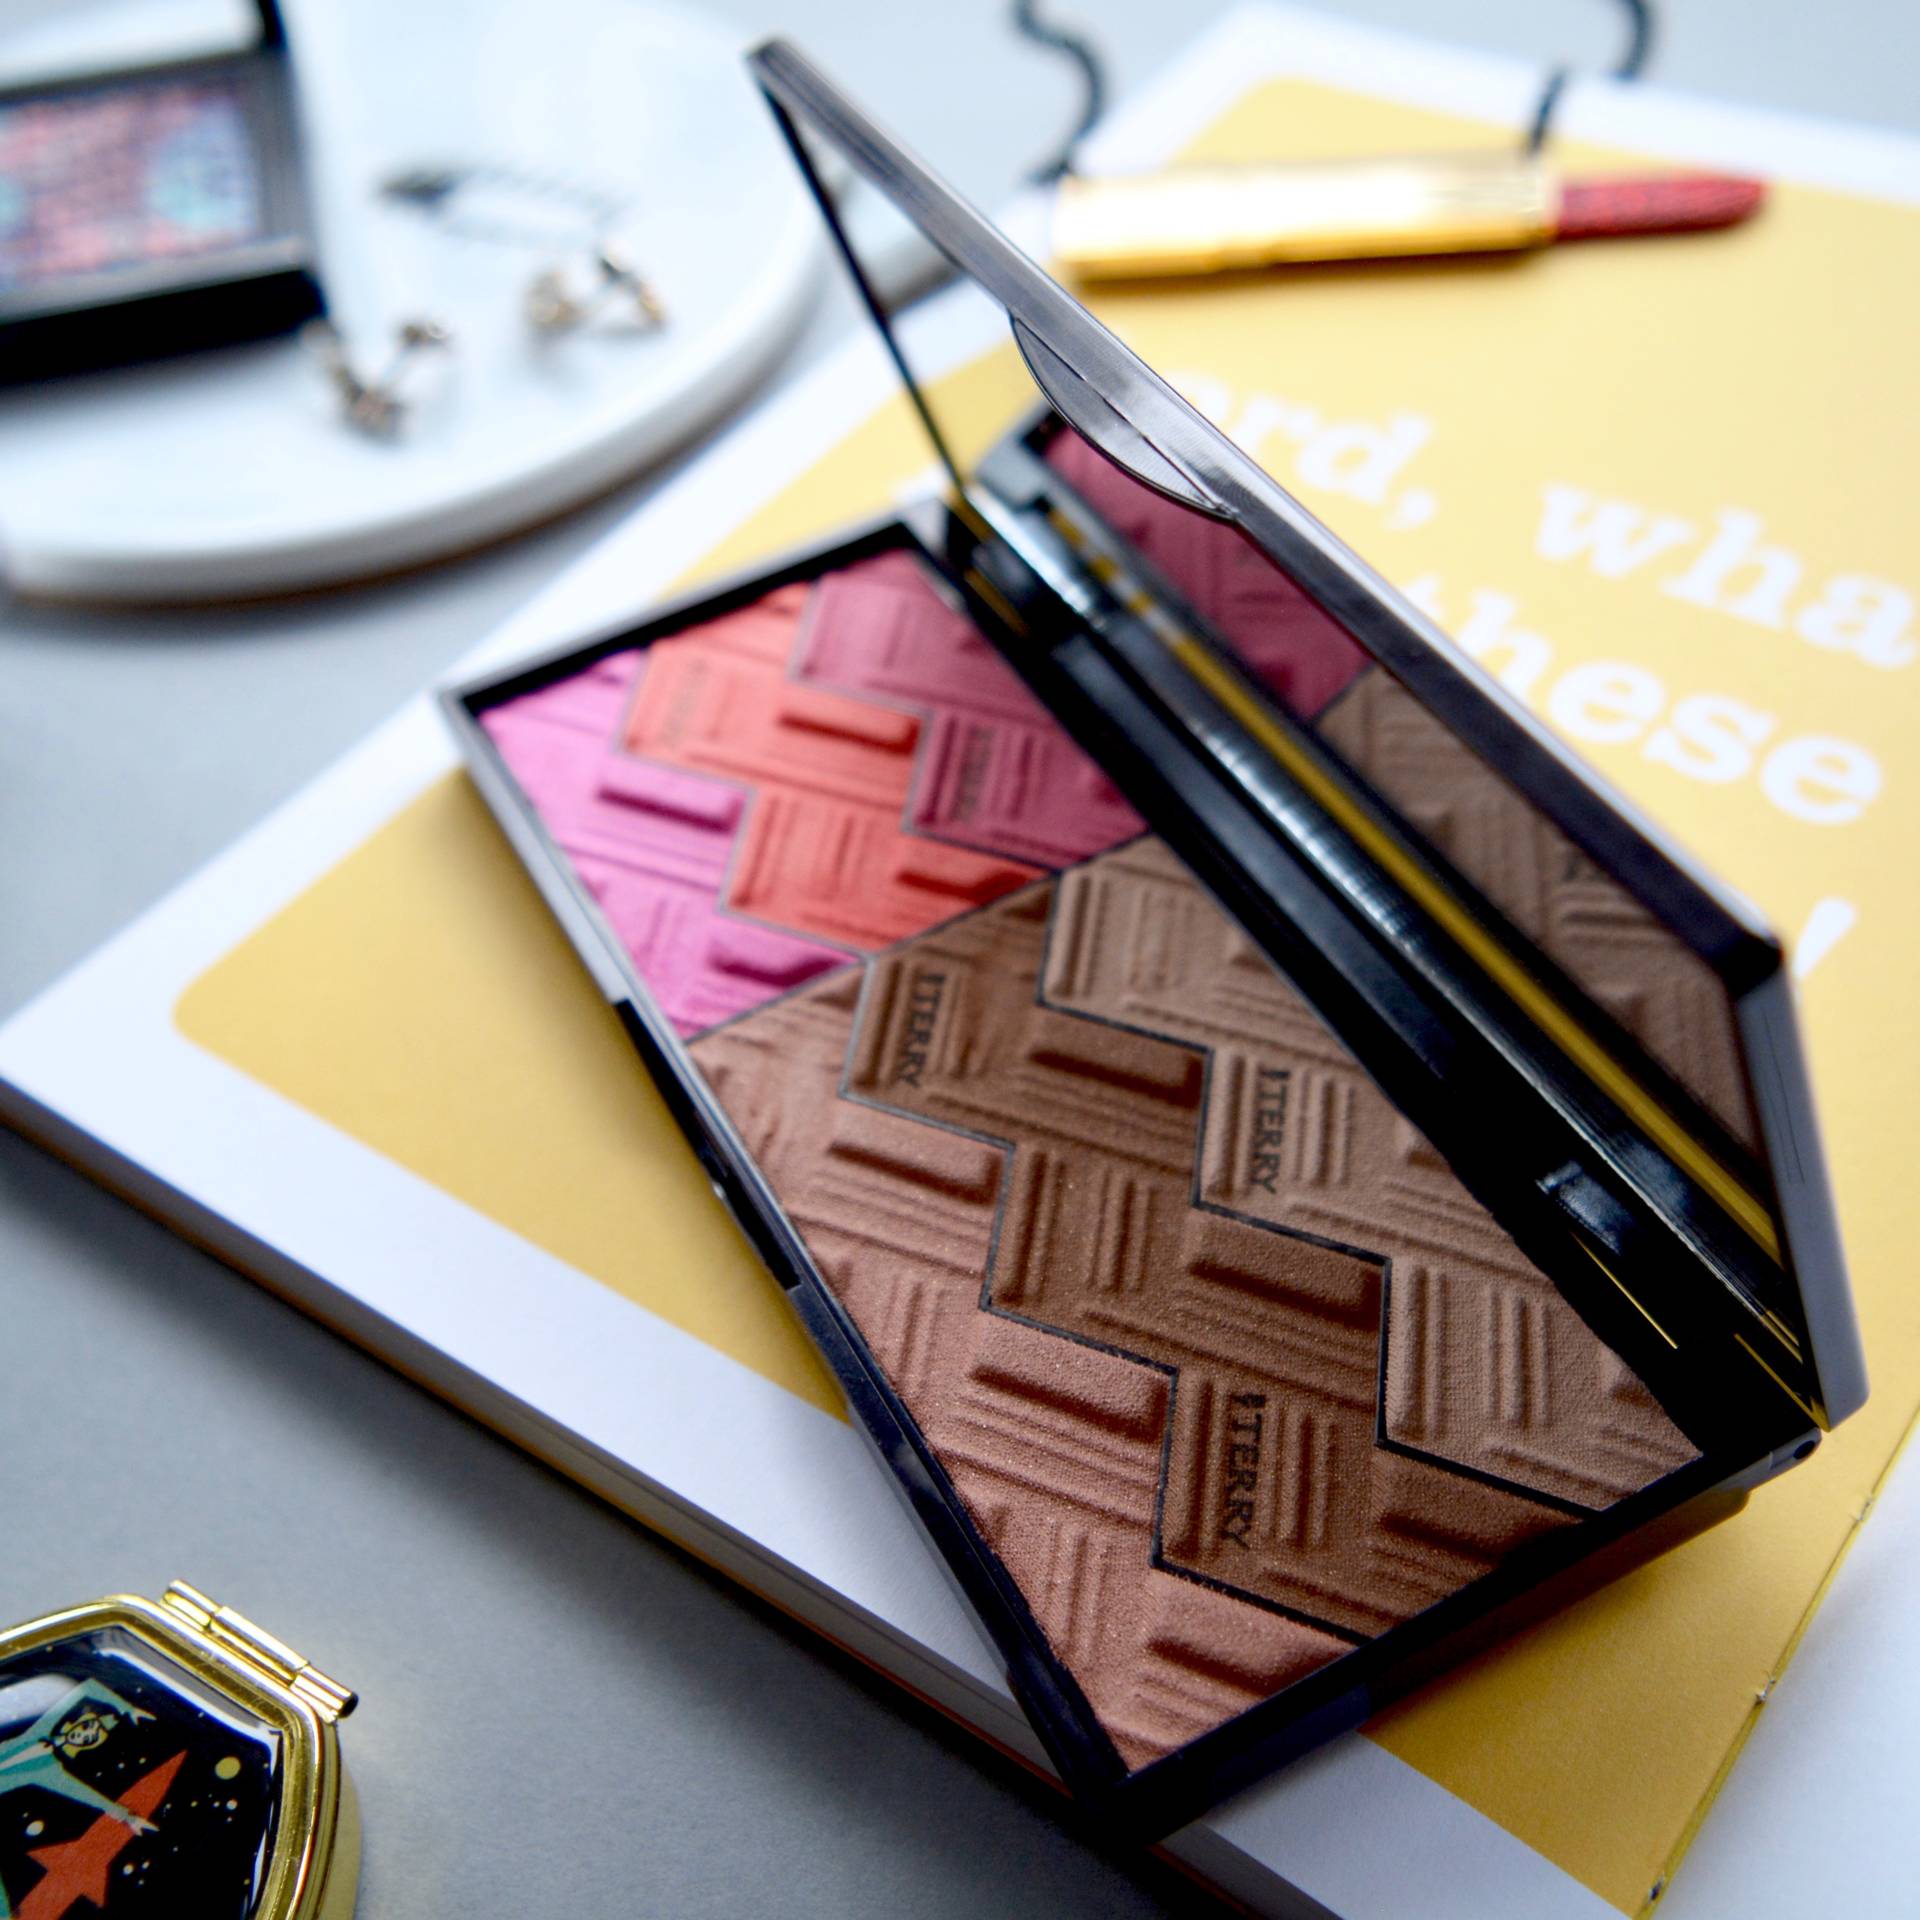 Beauty Products Too Pretty To Use: By Terry Sun Designer Palette